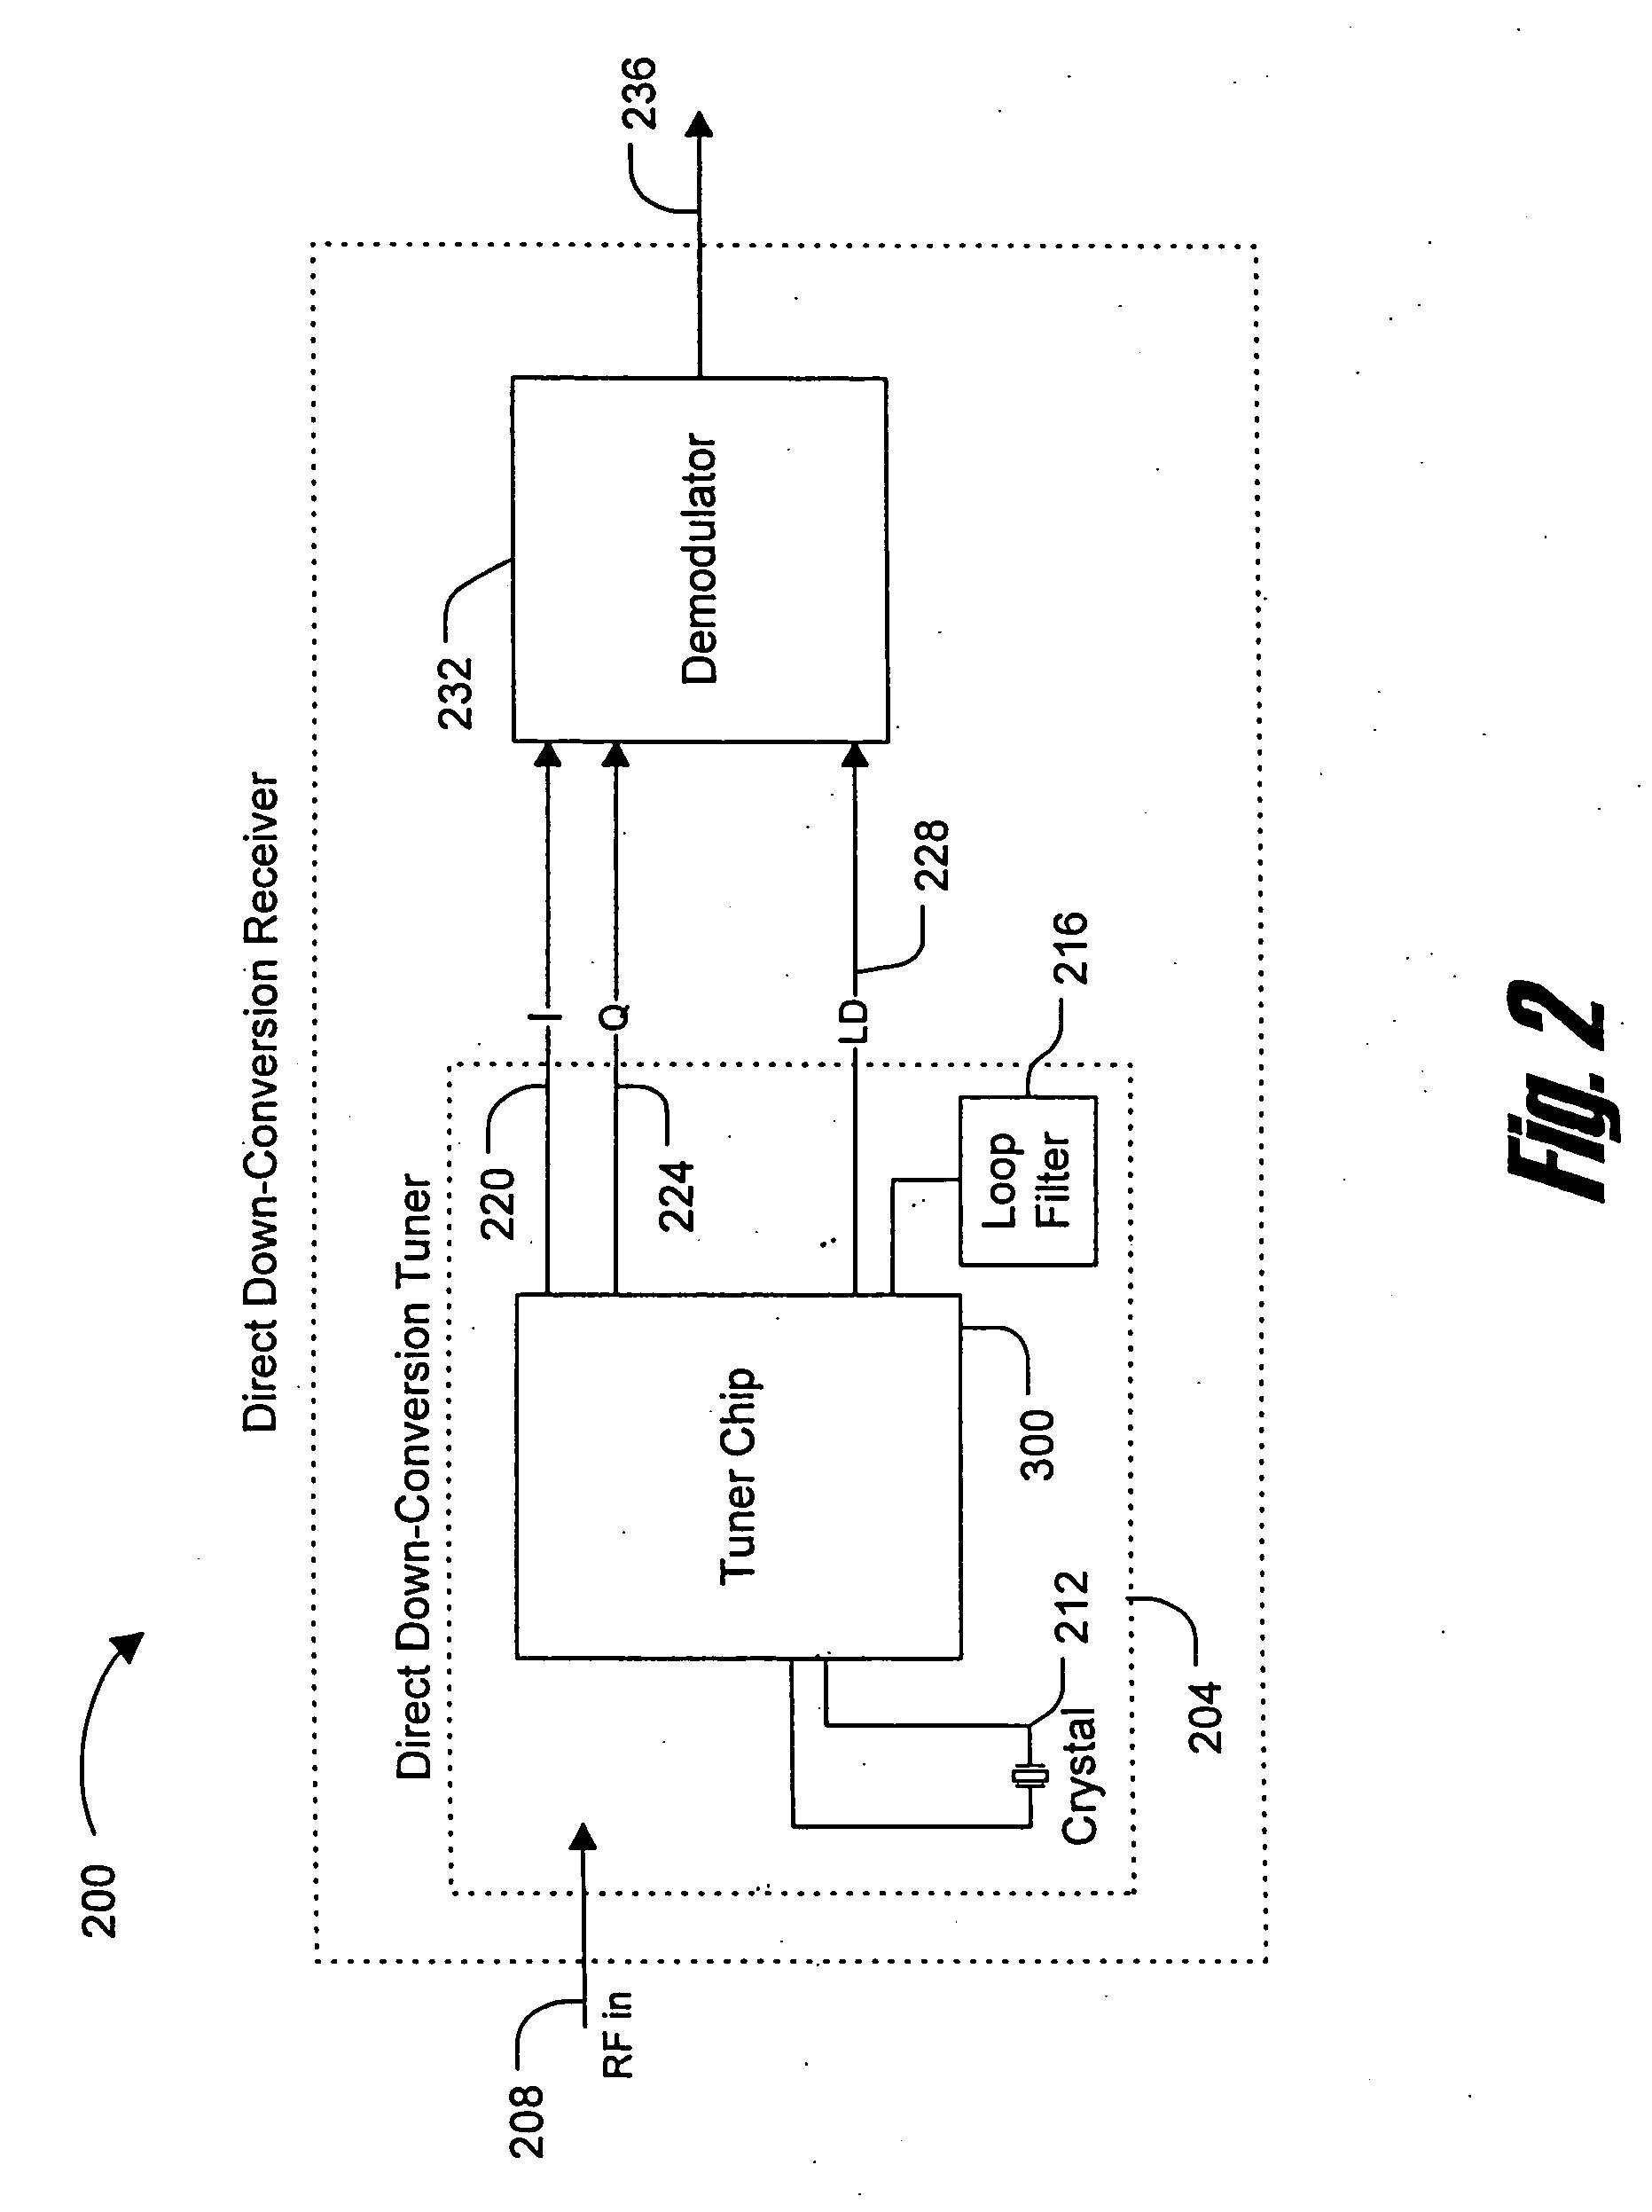 System and method of frequency synthesis to avoid gaps and VCO pulling in direct broadcast statelite systems